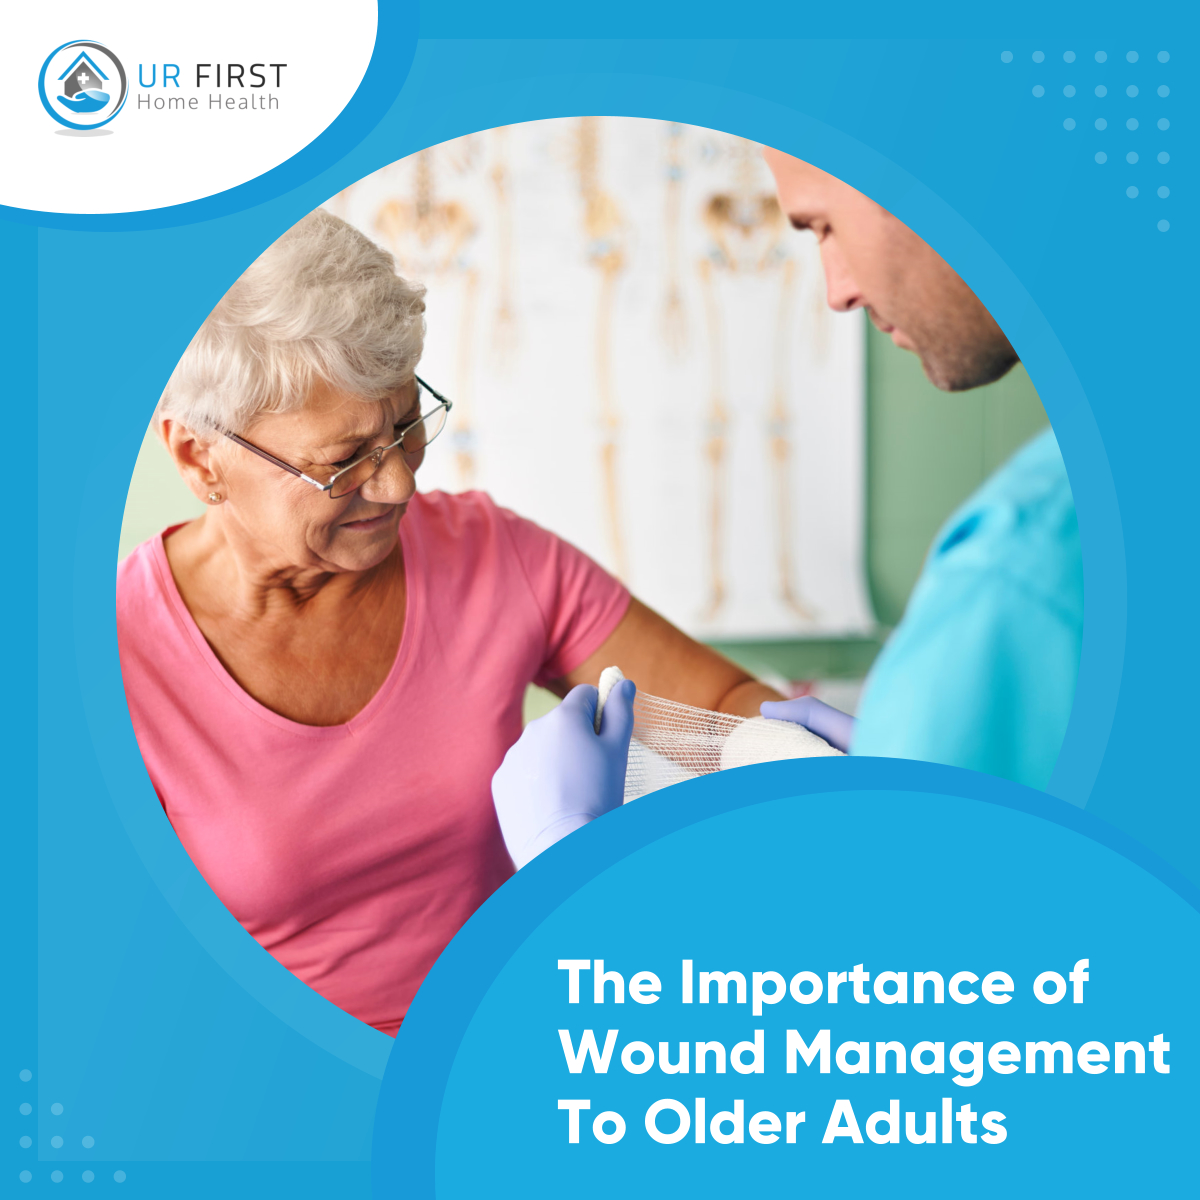 Wound care management is essential for all ages. As you age, however, wound management is critical since your skin slowly loses its ability to regenerate itself.

Read more:
facebook.com/urfirsthomehea…

#LasVegasNV #HomeHealthServices #WoundManagement #Seniors #OverallBeing